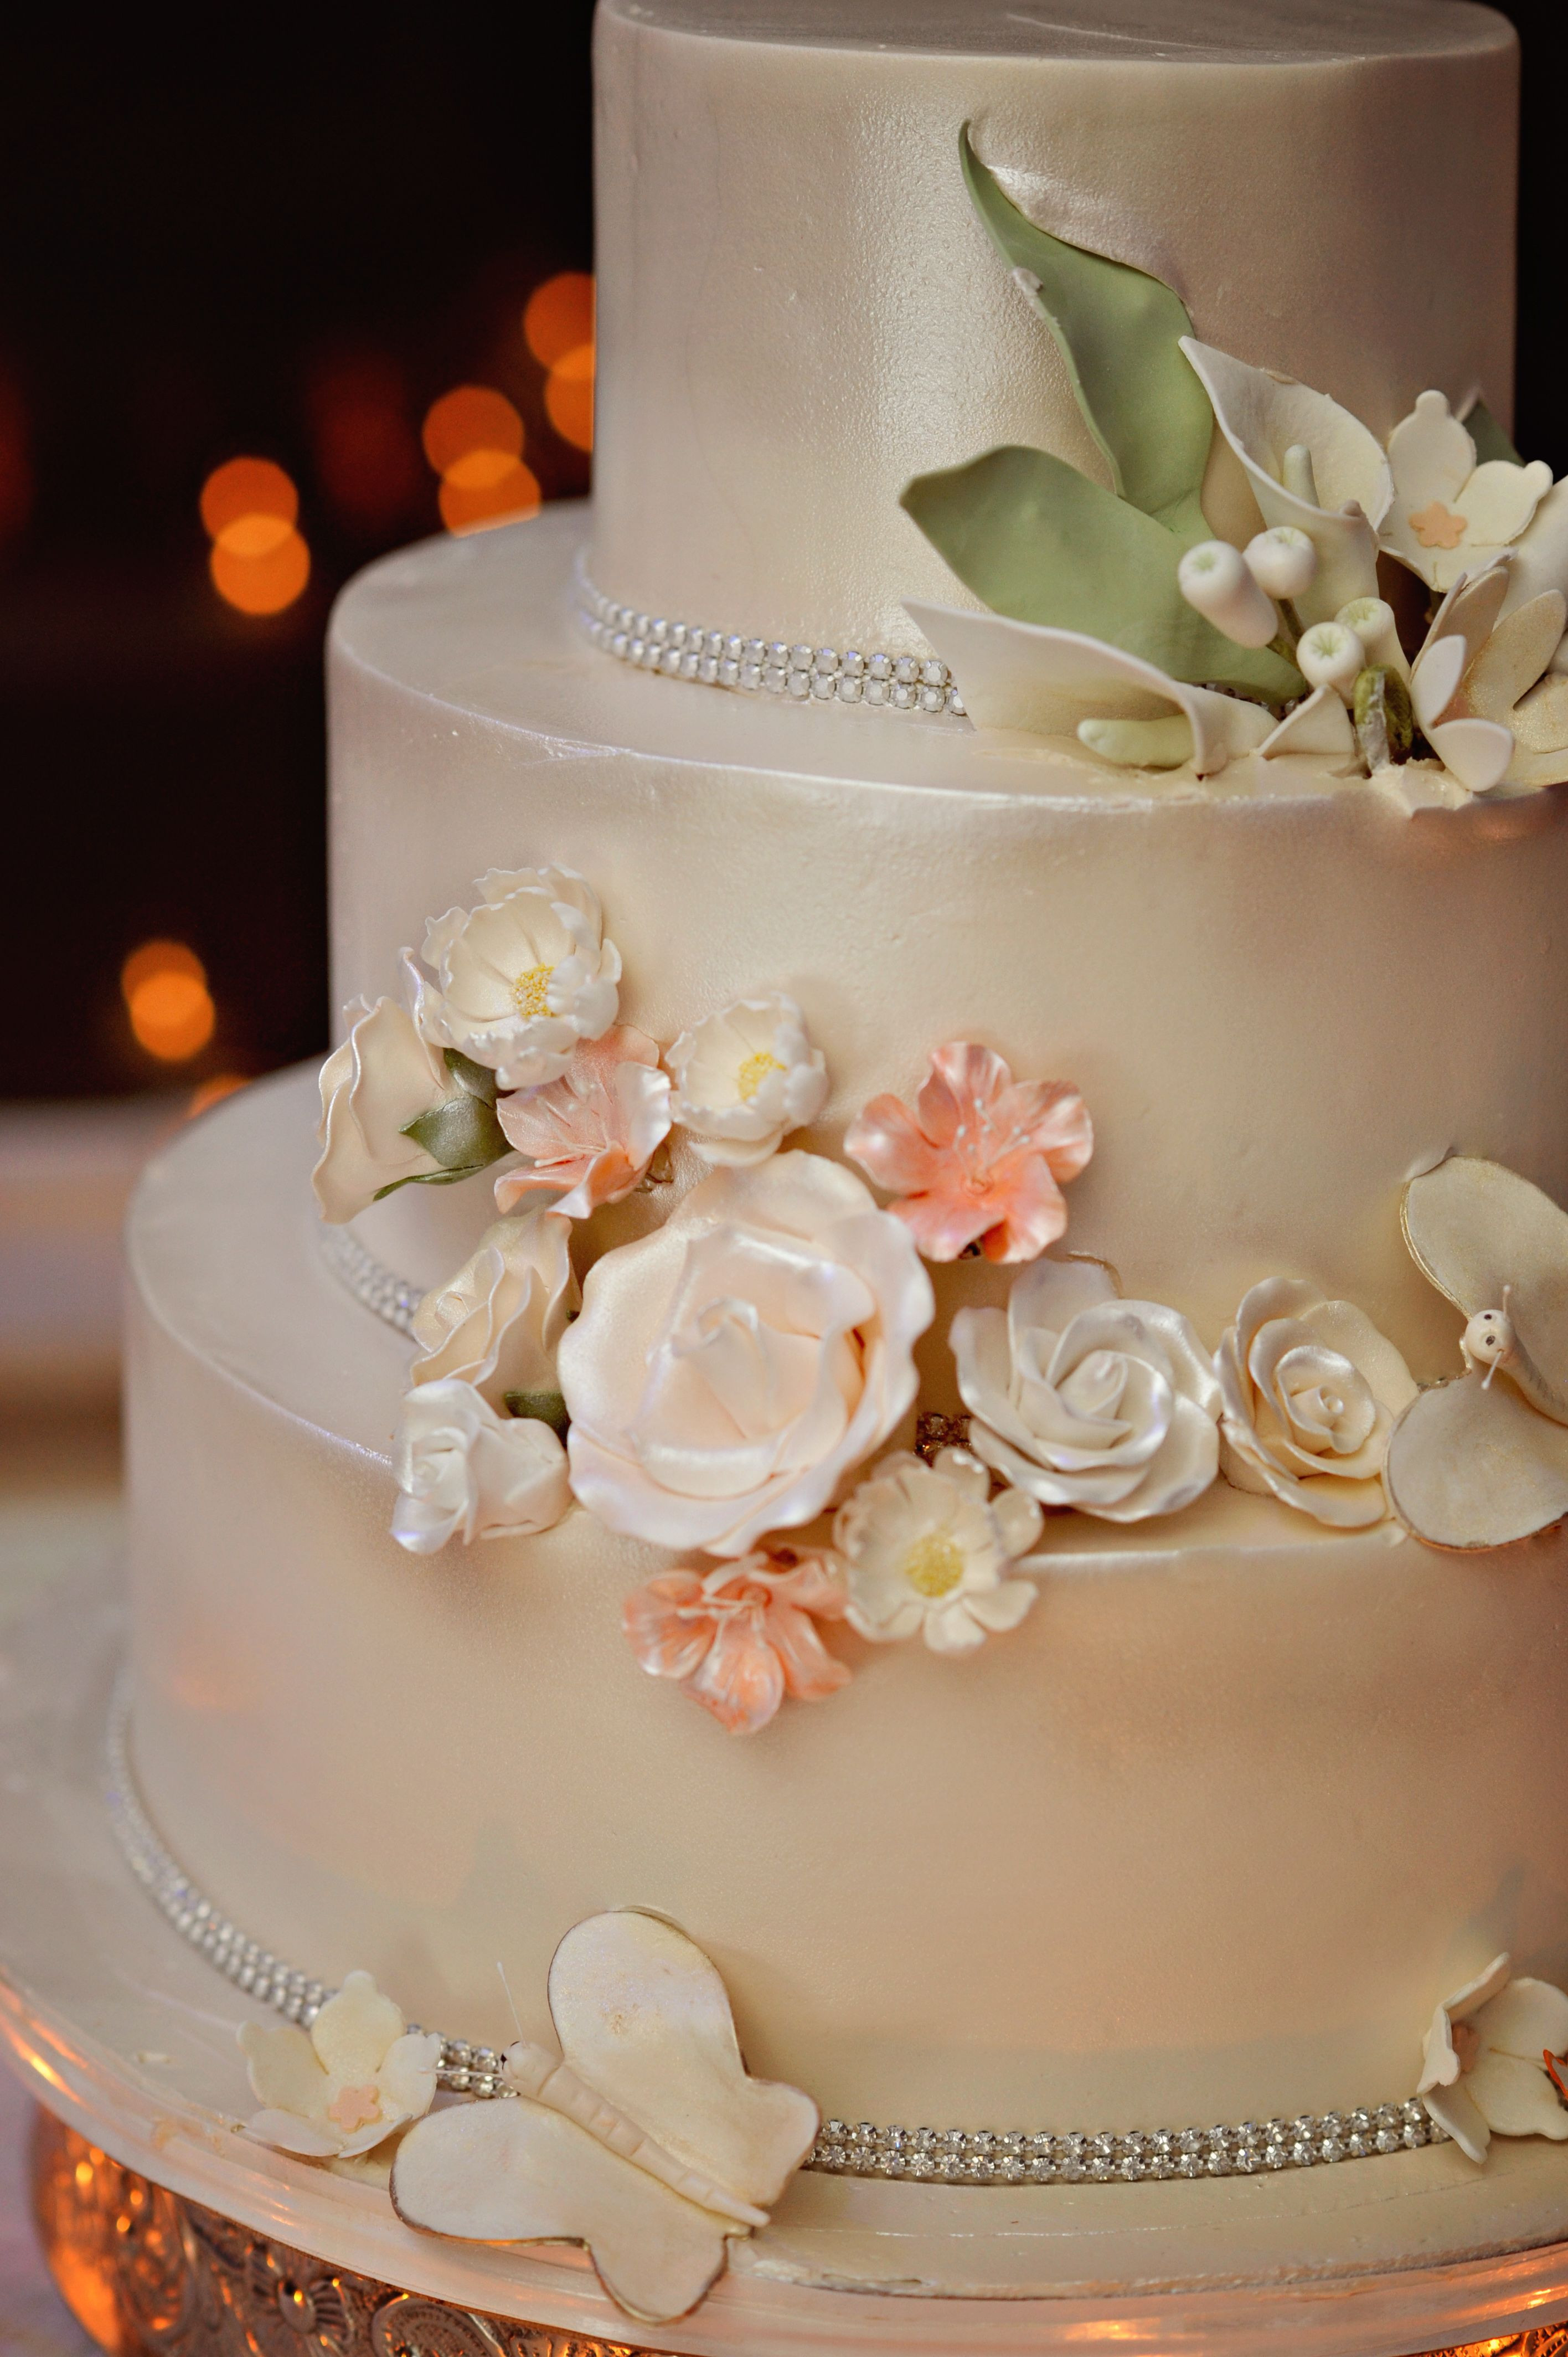 Champagne Colored Wedding Cakes
 Three Tier Wedding Cake With Champagne Colored Luster Dust